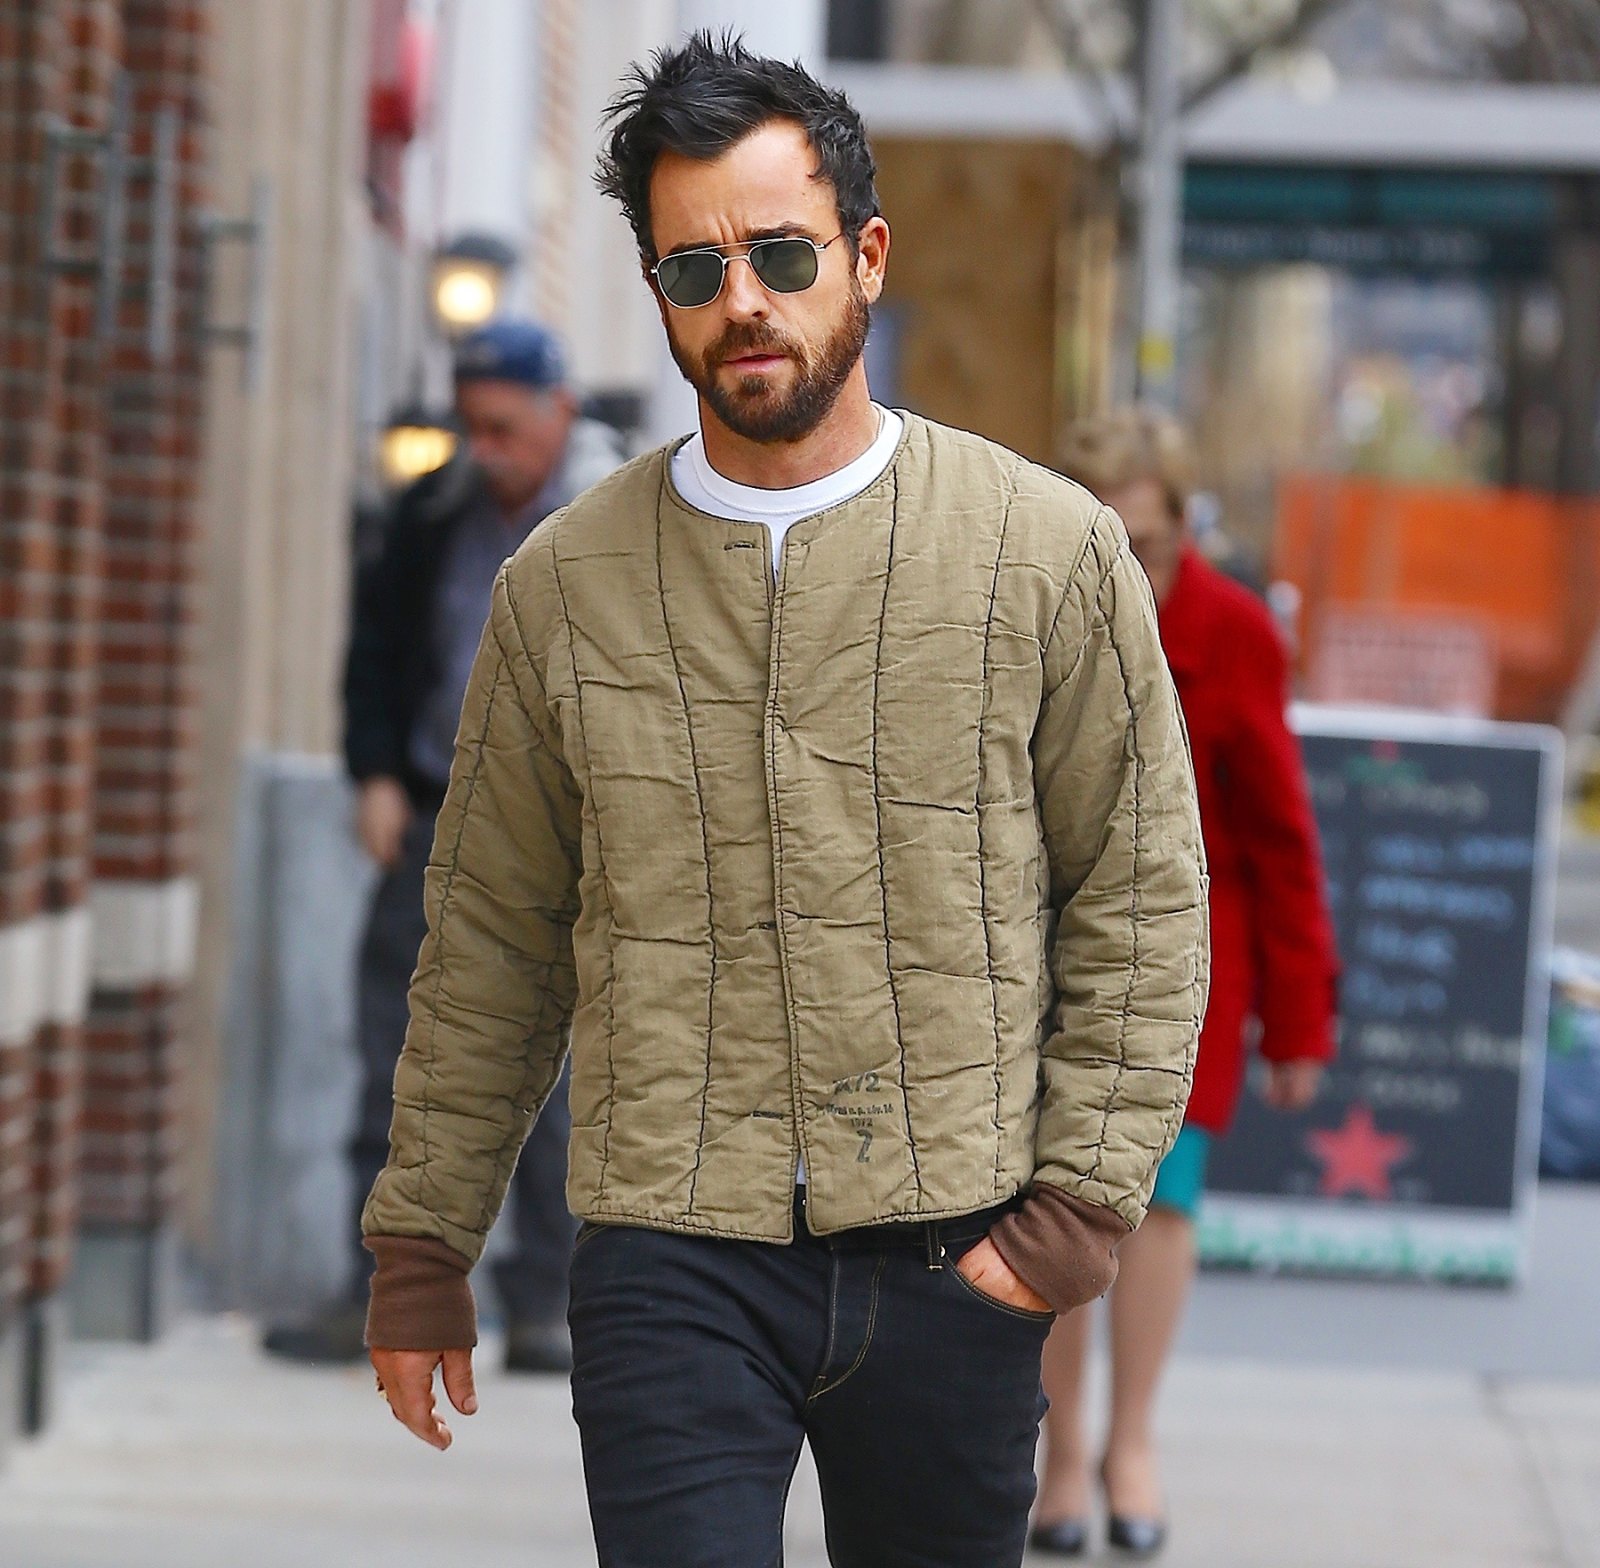 Justin Theroux Steps Out Sans Wedding Ring: Pics | Us Weekly